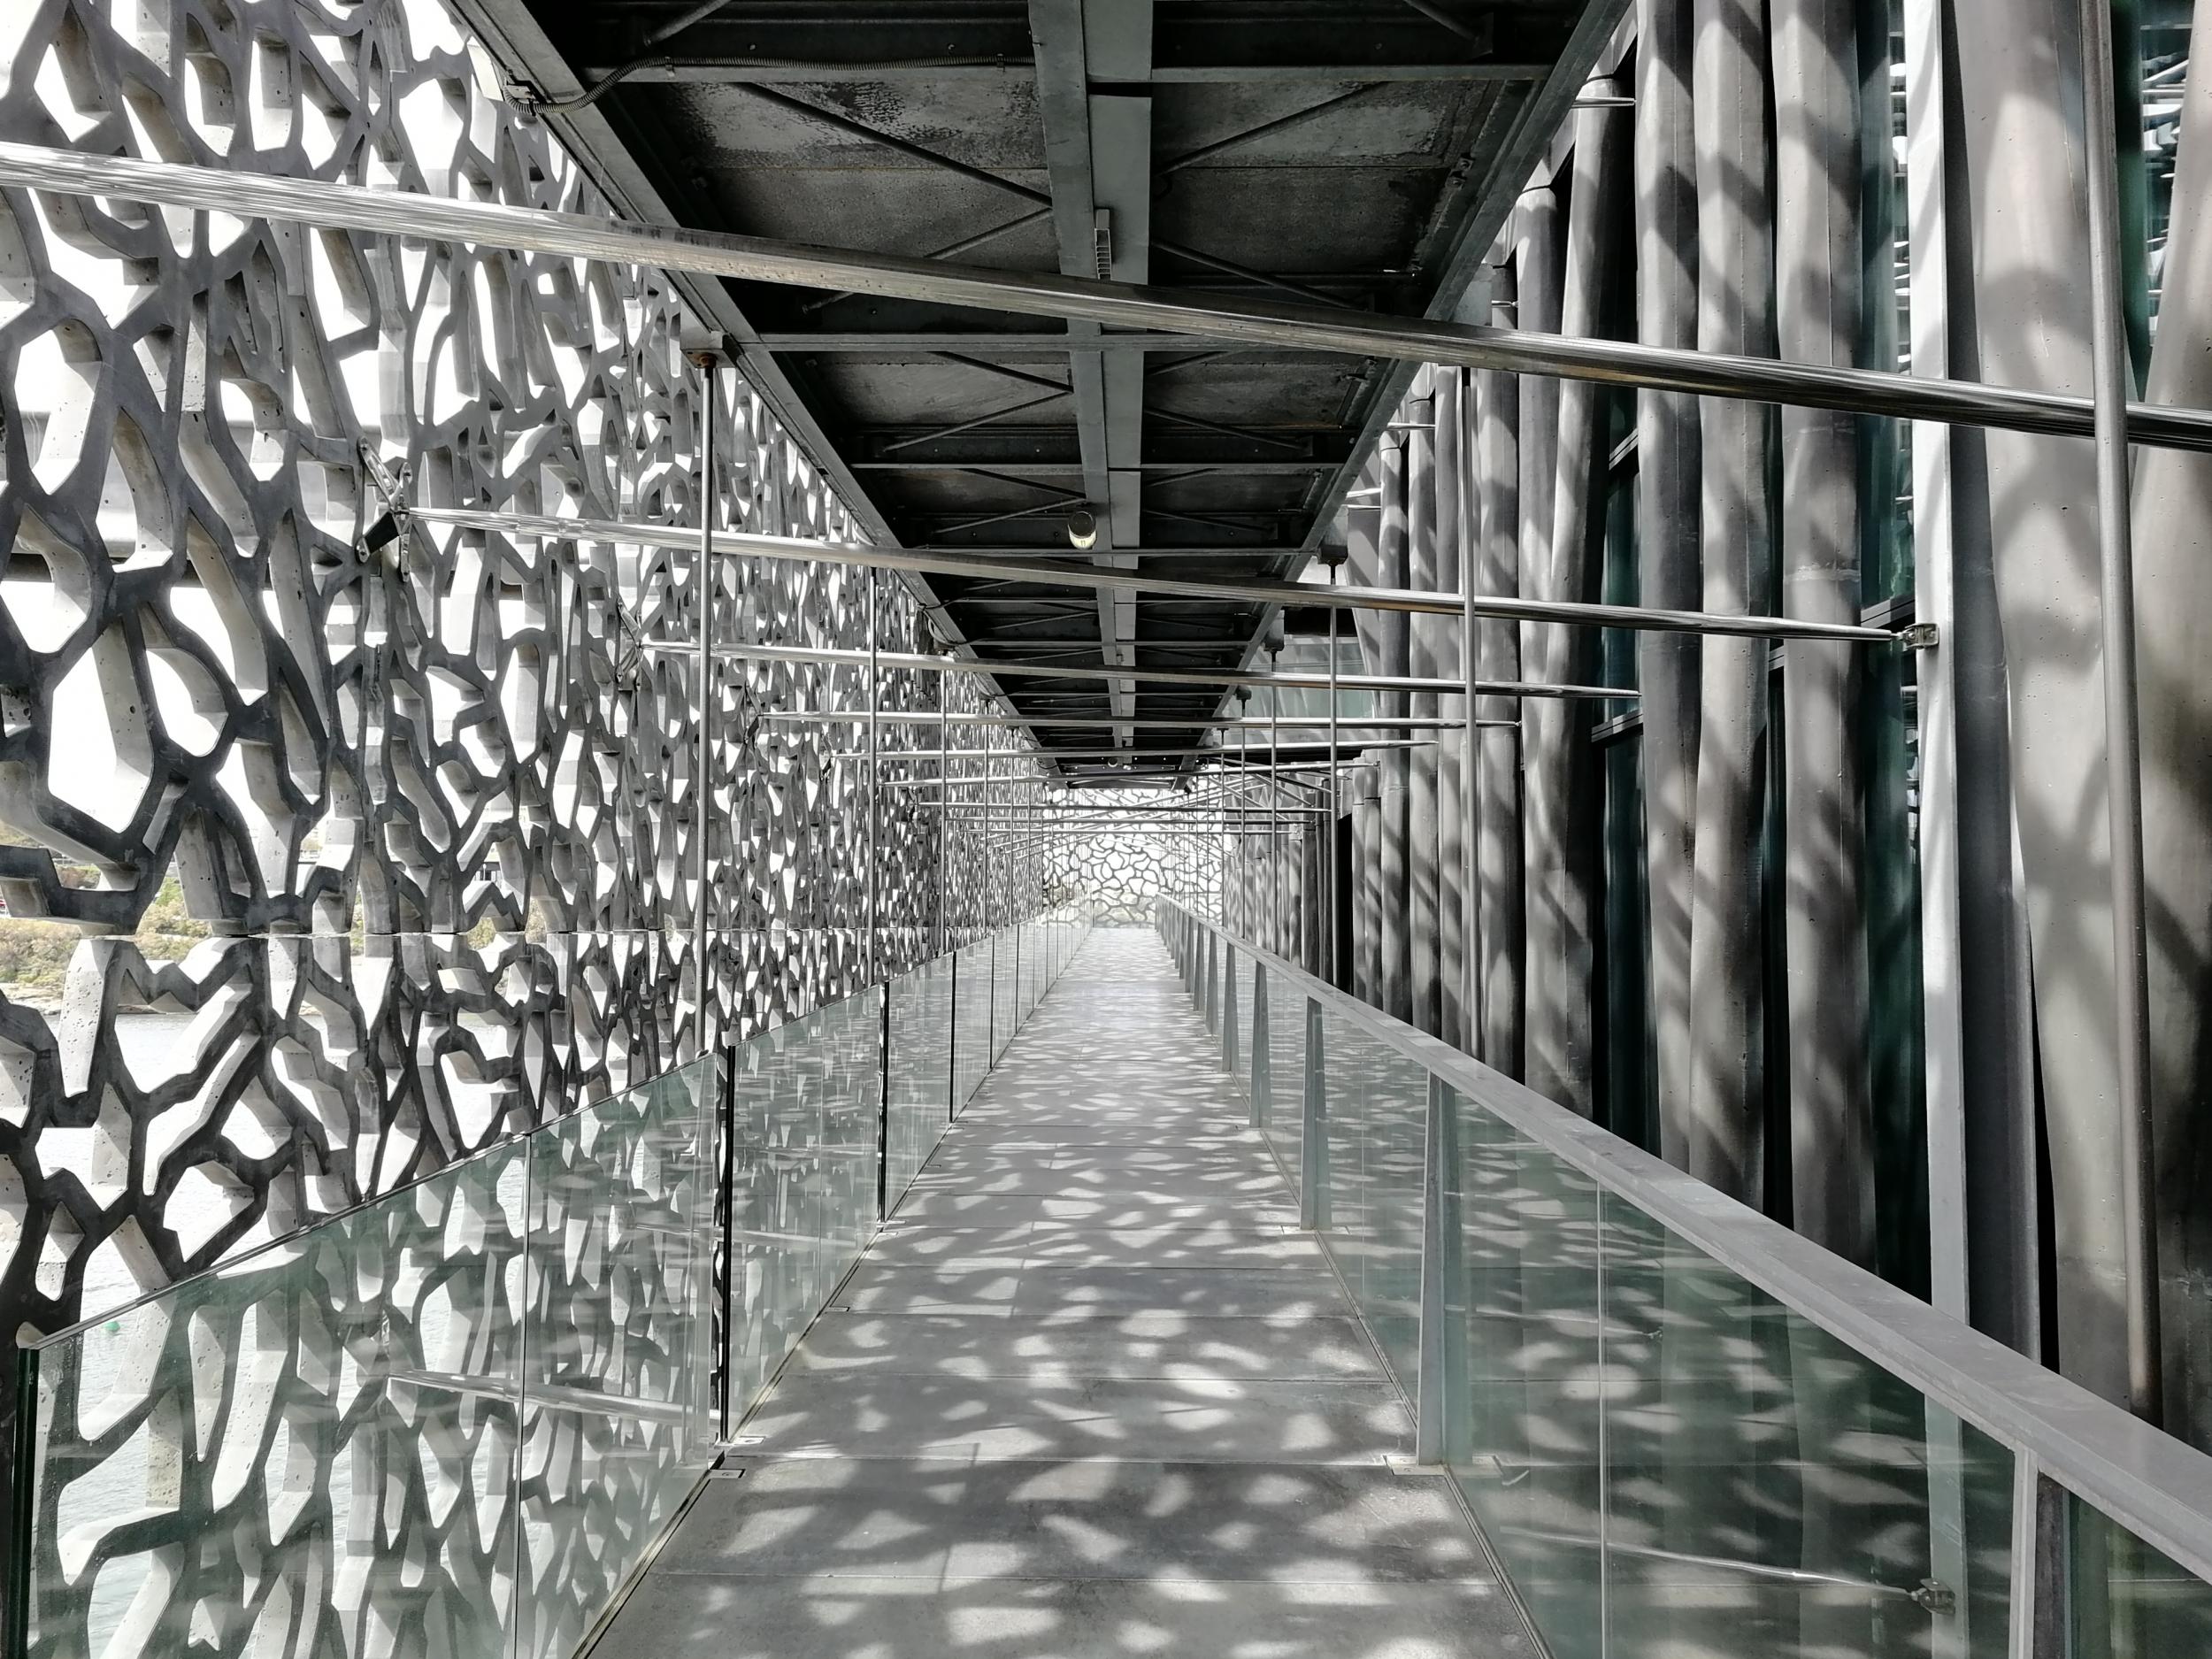 MuCem’s pathway is modern yet ethereal